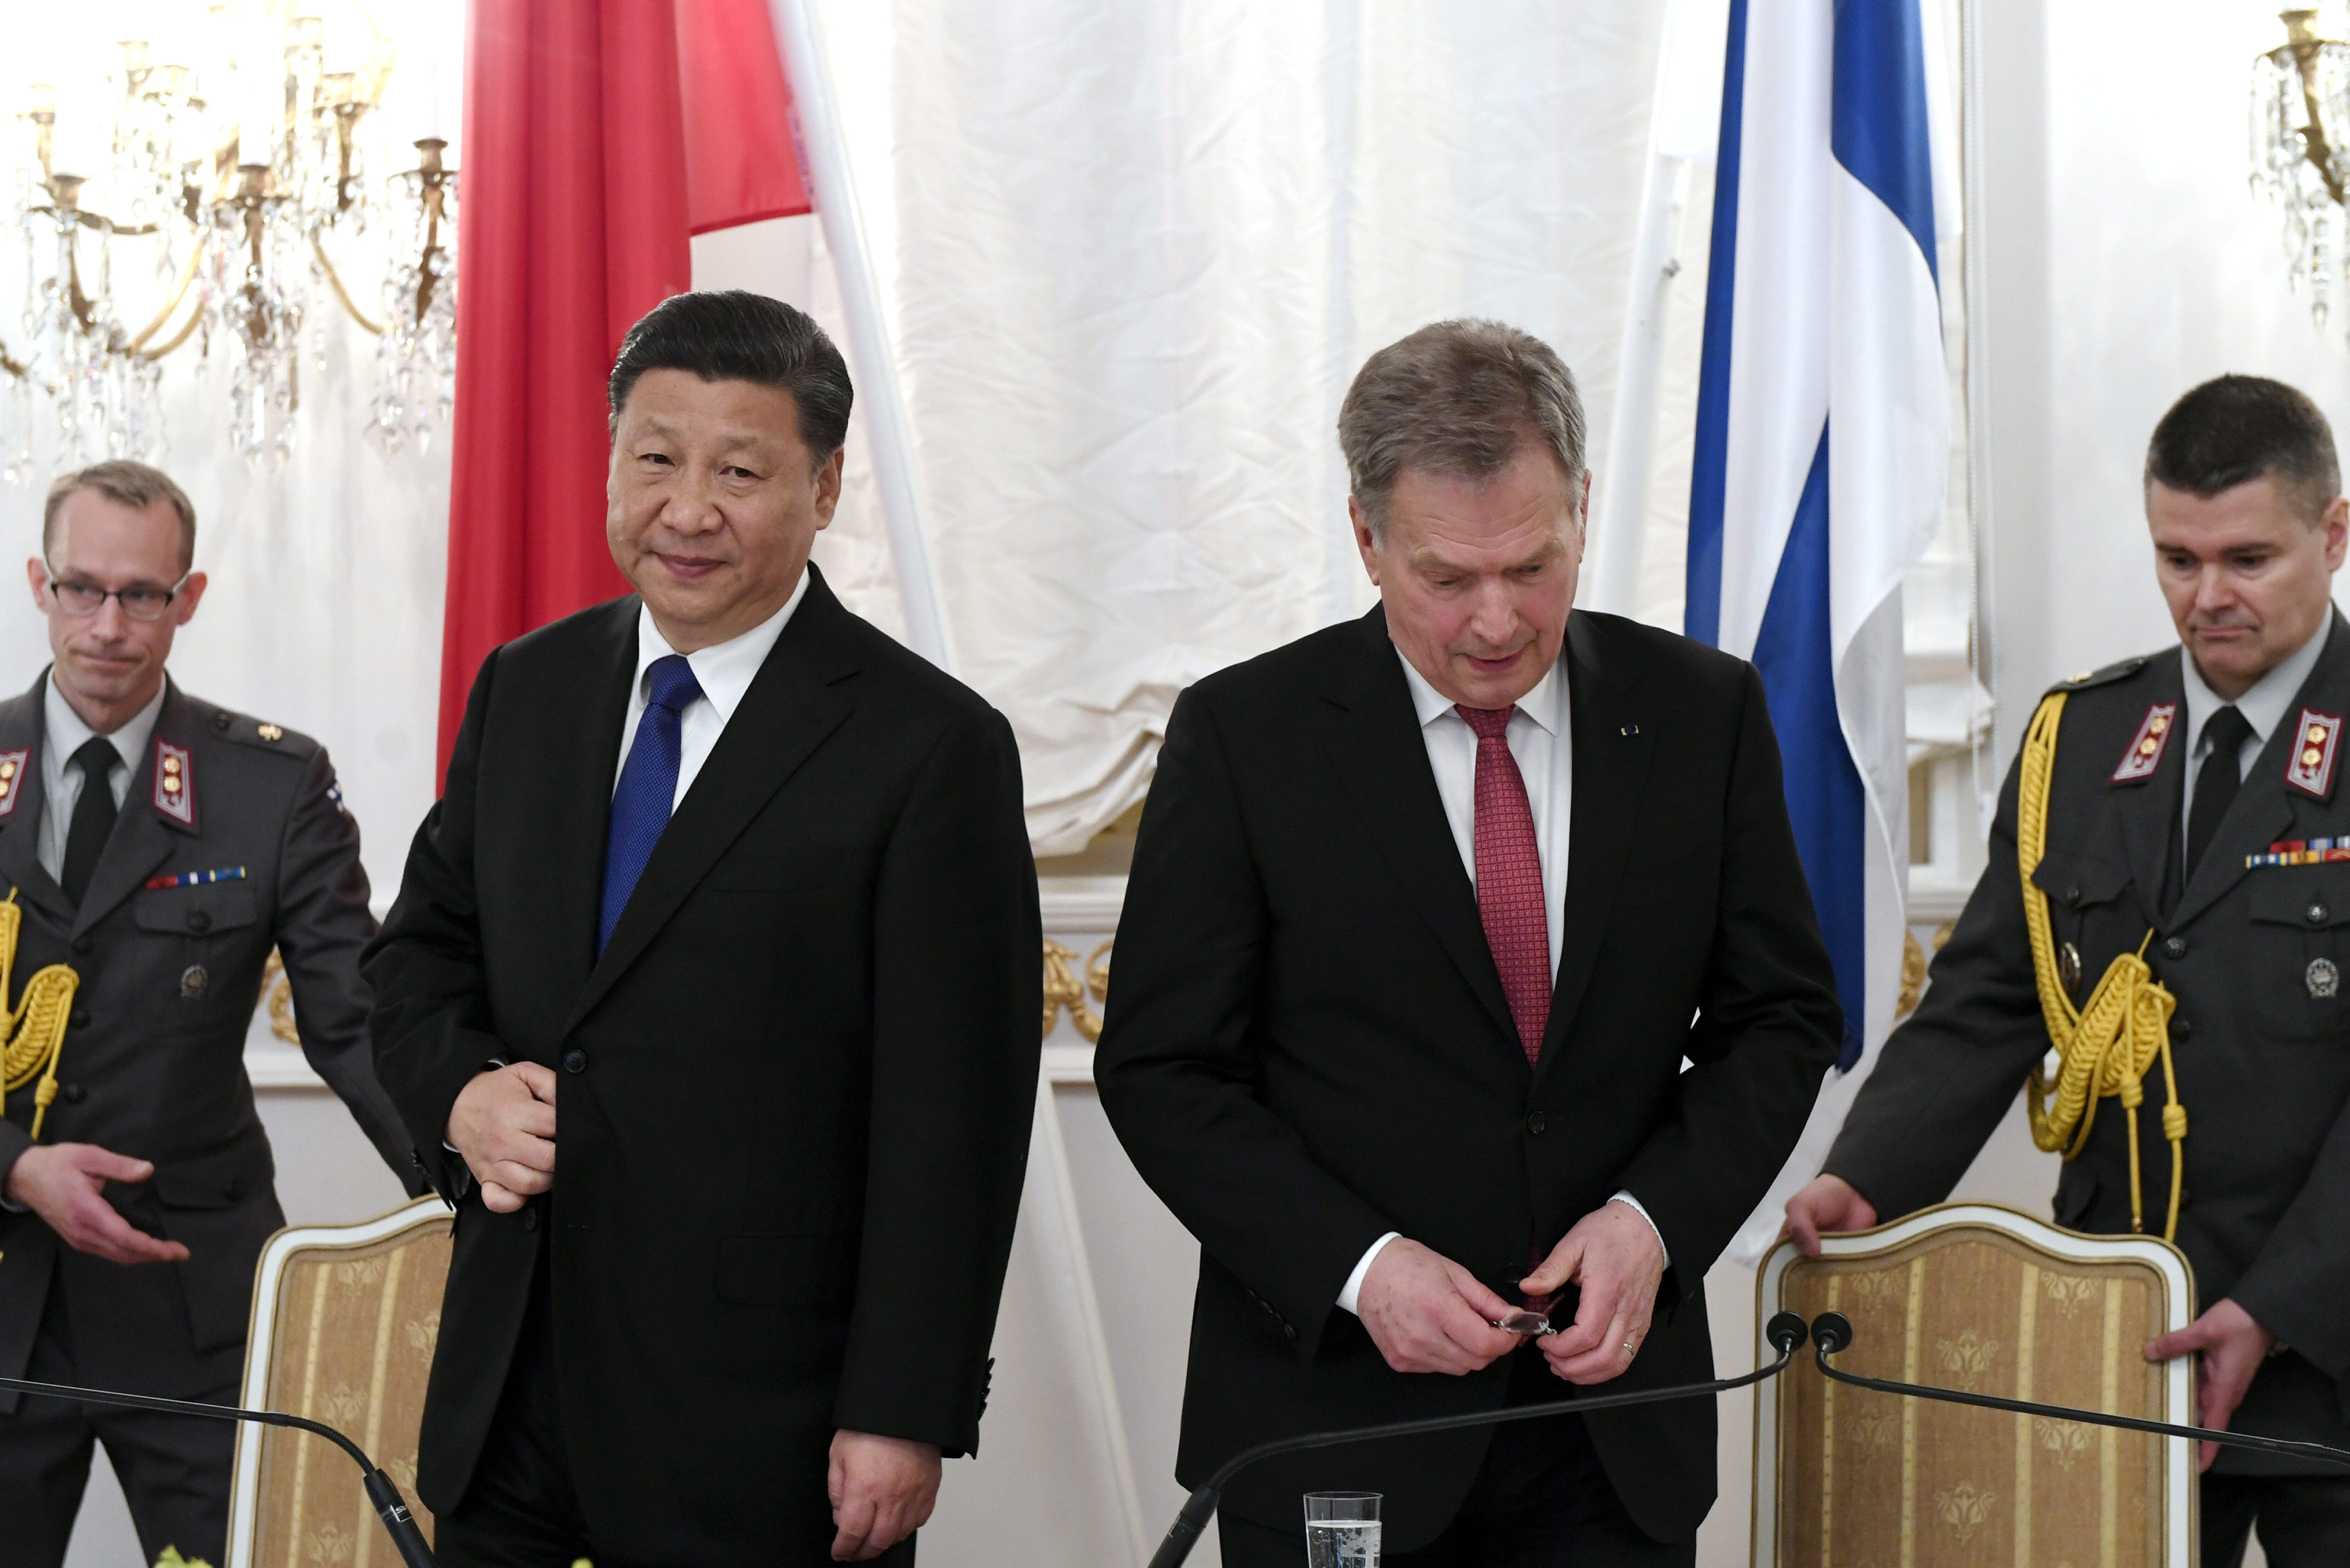 China's President Xi Jinping and Finland's President Sauli Niinisto attend the signing ceremony at the Presidential Palace in Helsinki, Finland April 5, 2017. Lehtikuva/Vesa Moilanen/via REUTERS